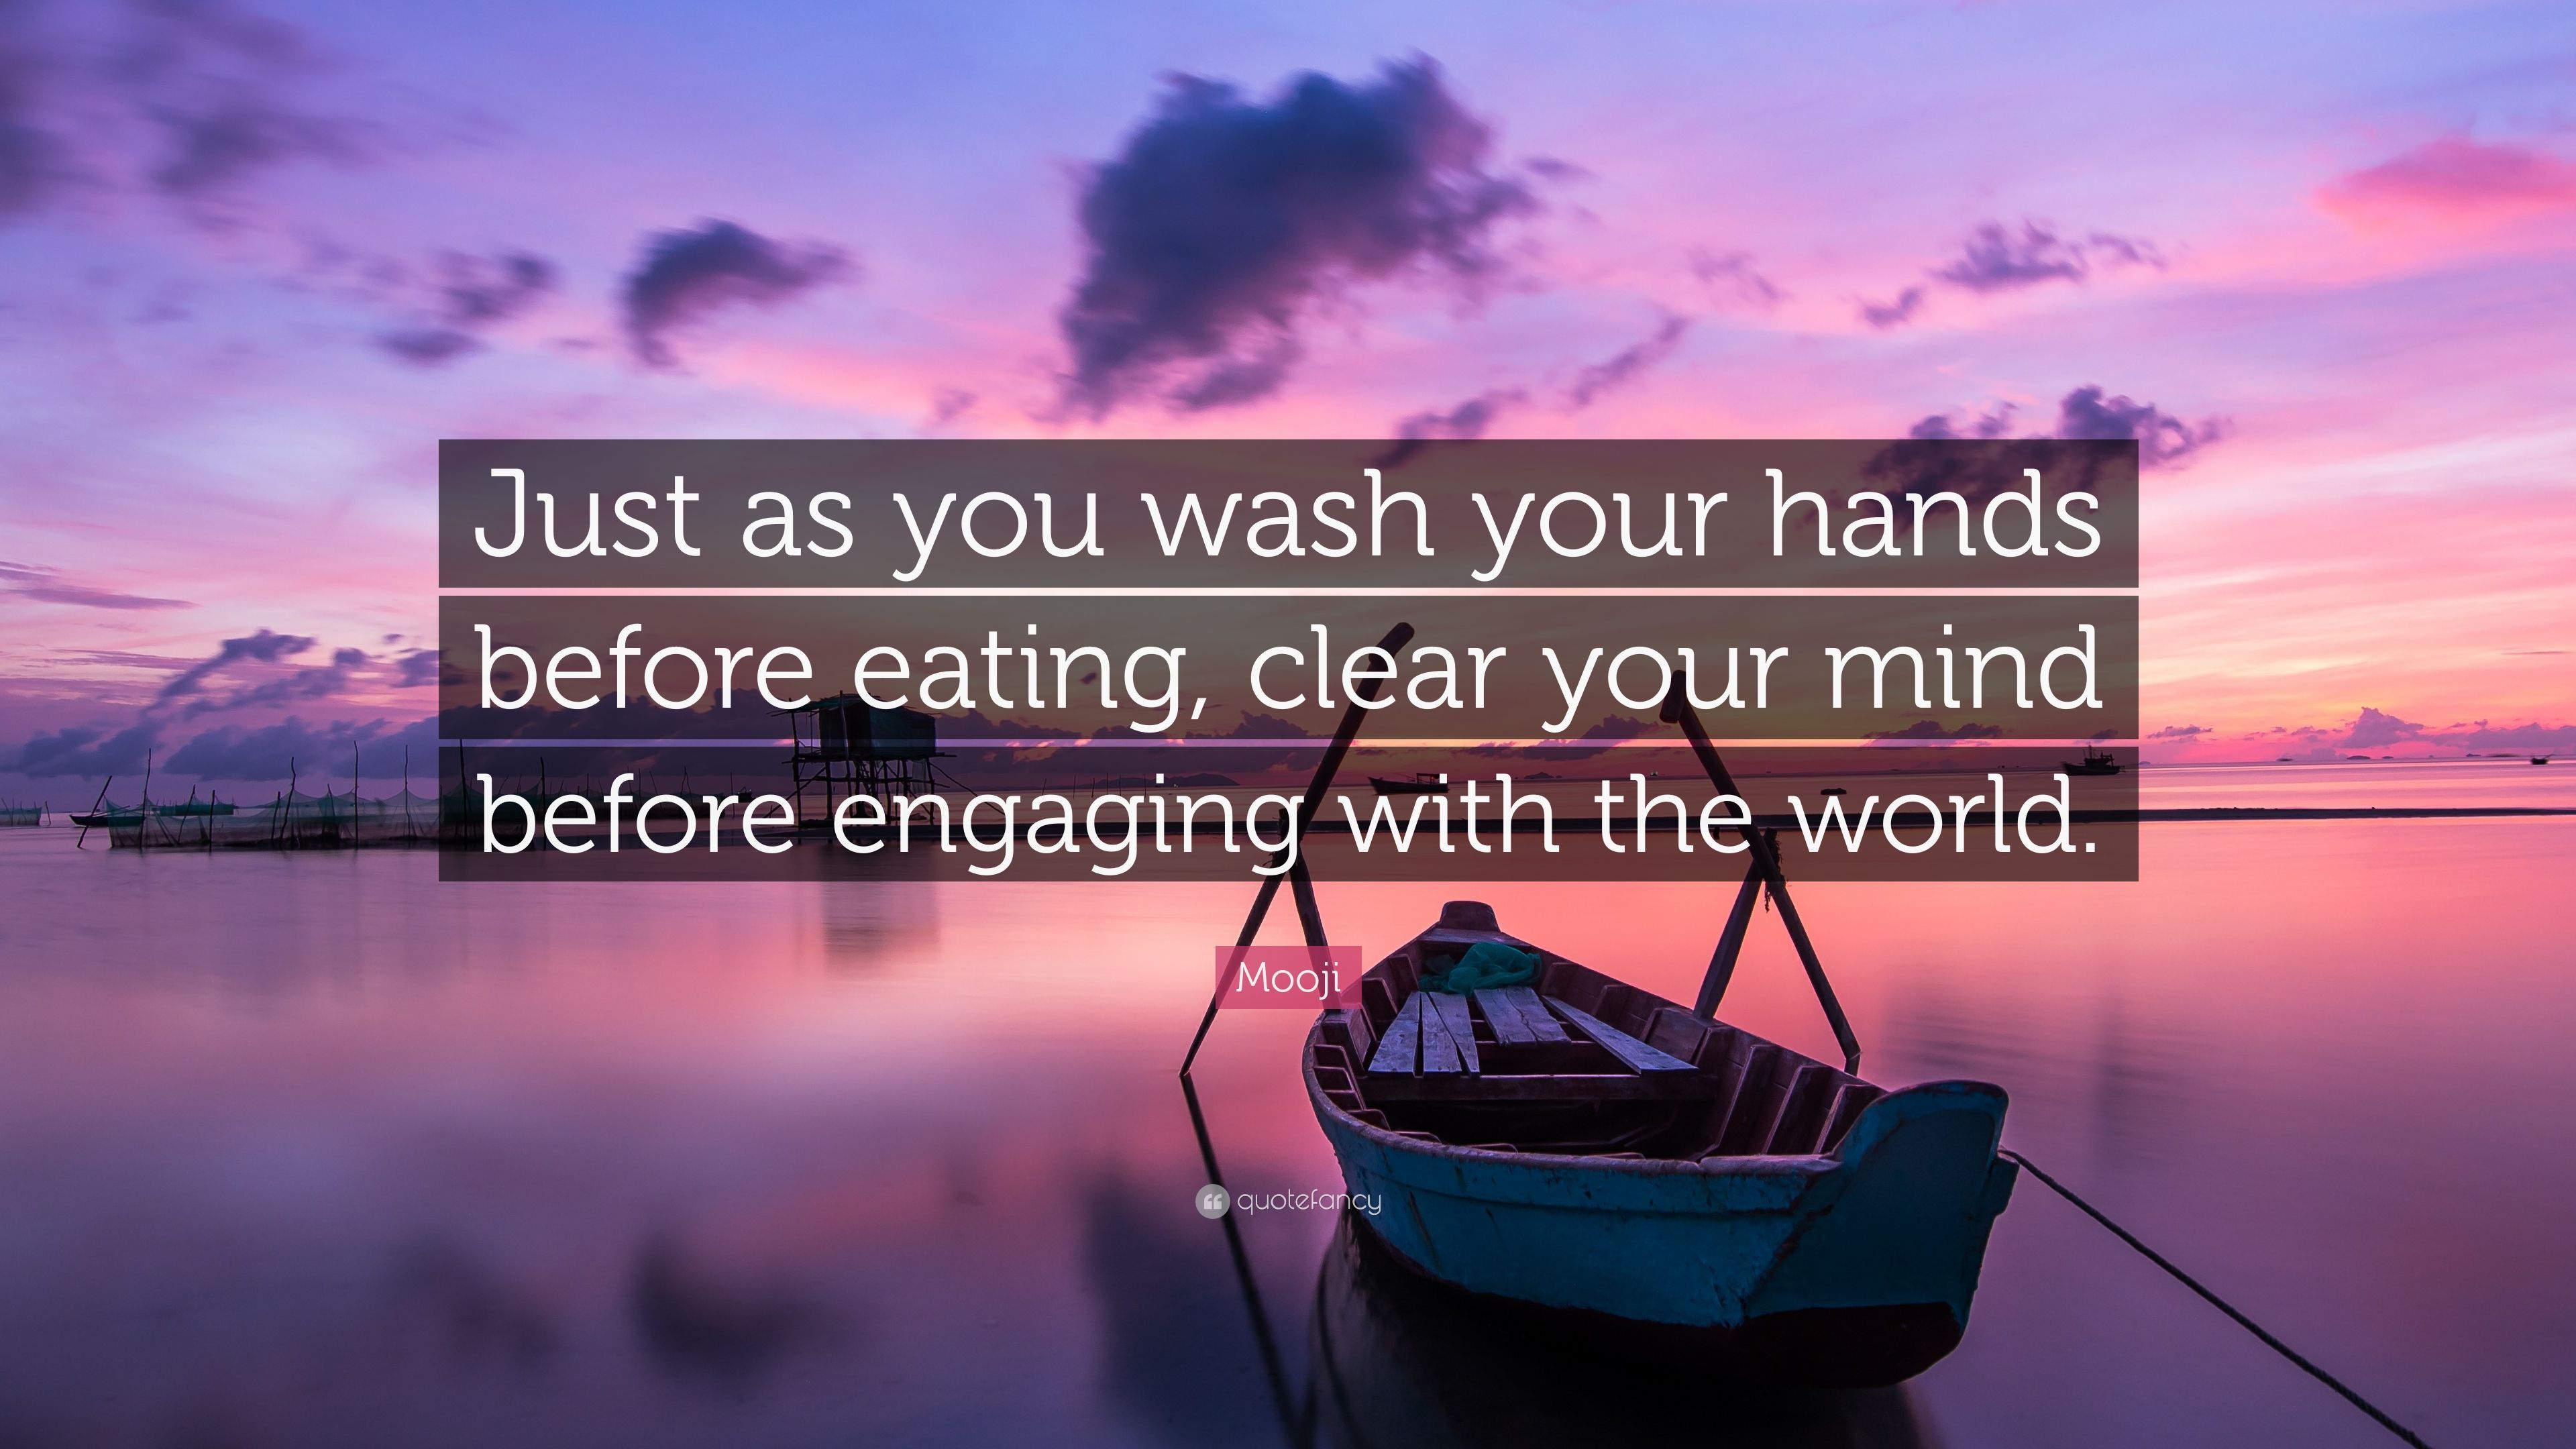 Mooji Quote: “Just as you wash your hands before eating, clear